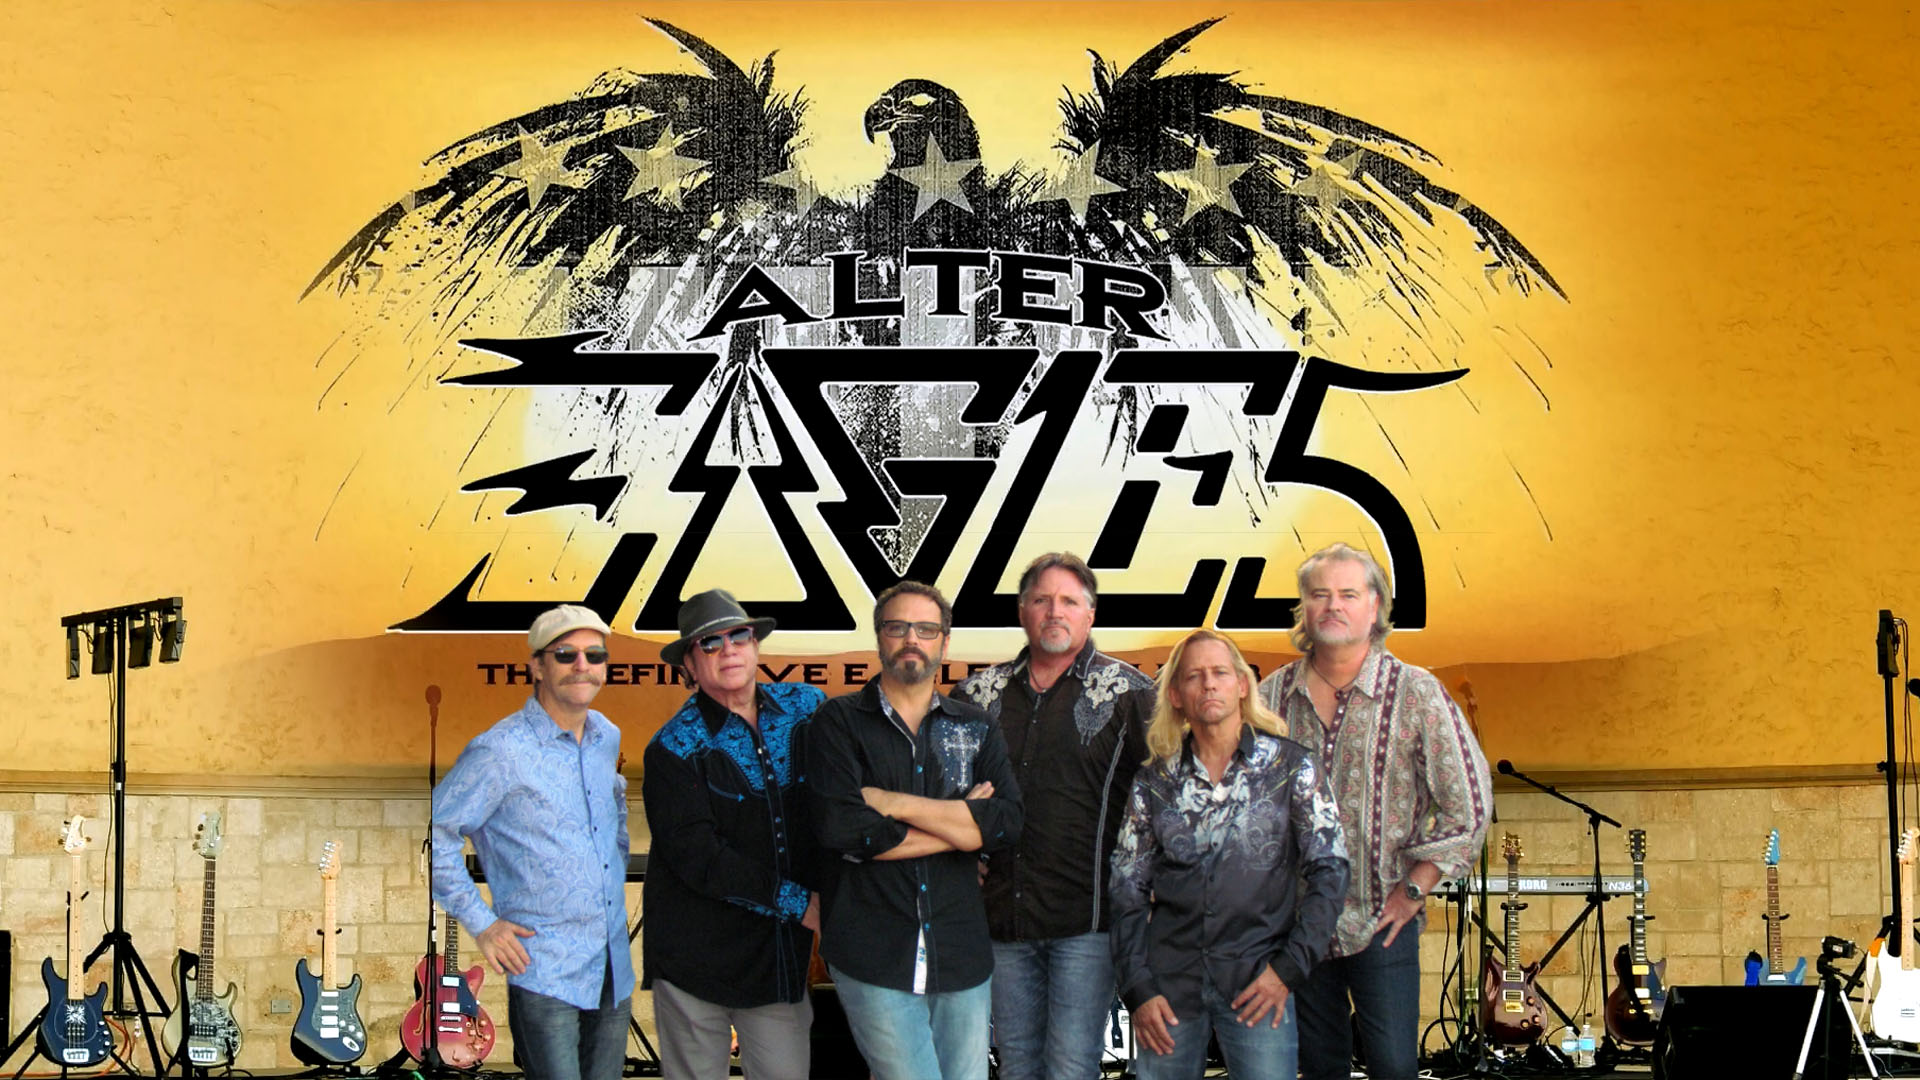 The Wharf at Sunset Walk presents Alter Eagles: The Definitive Tribute to The Eagles